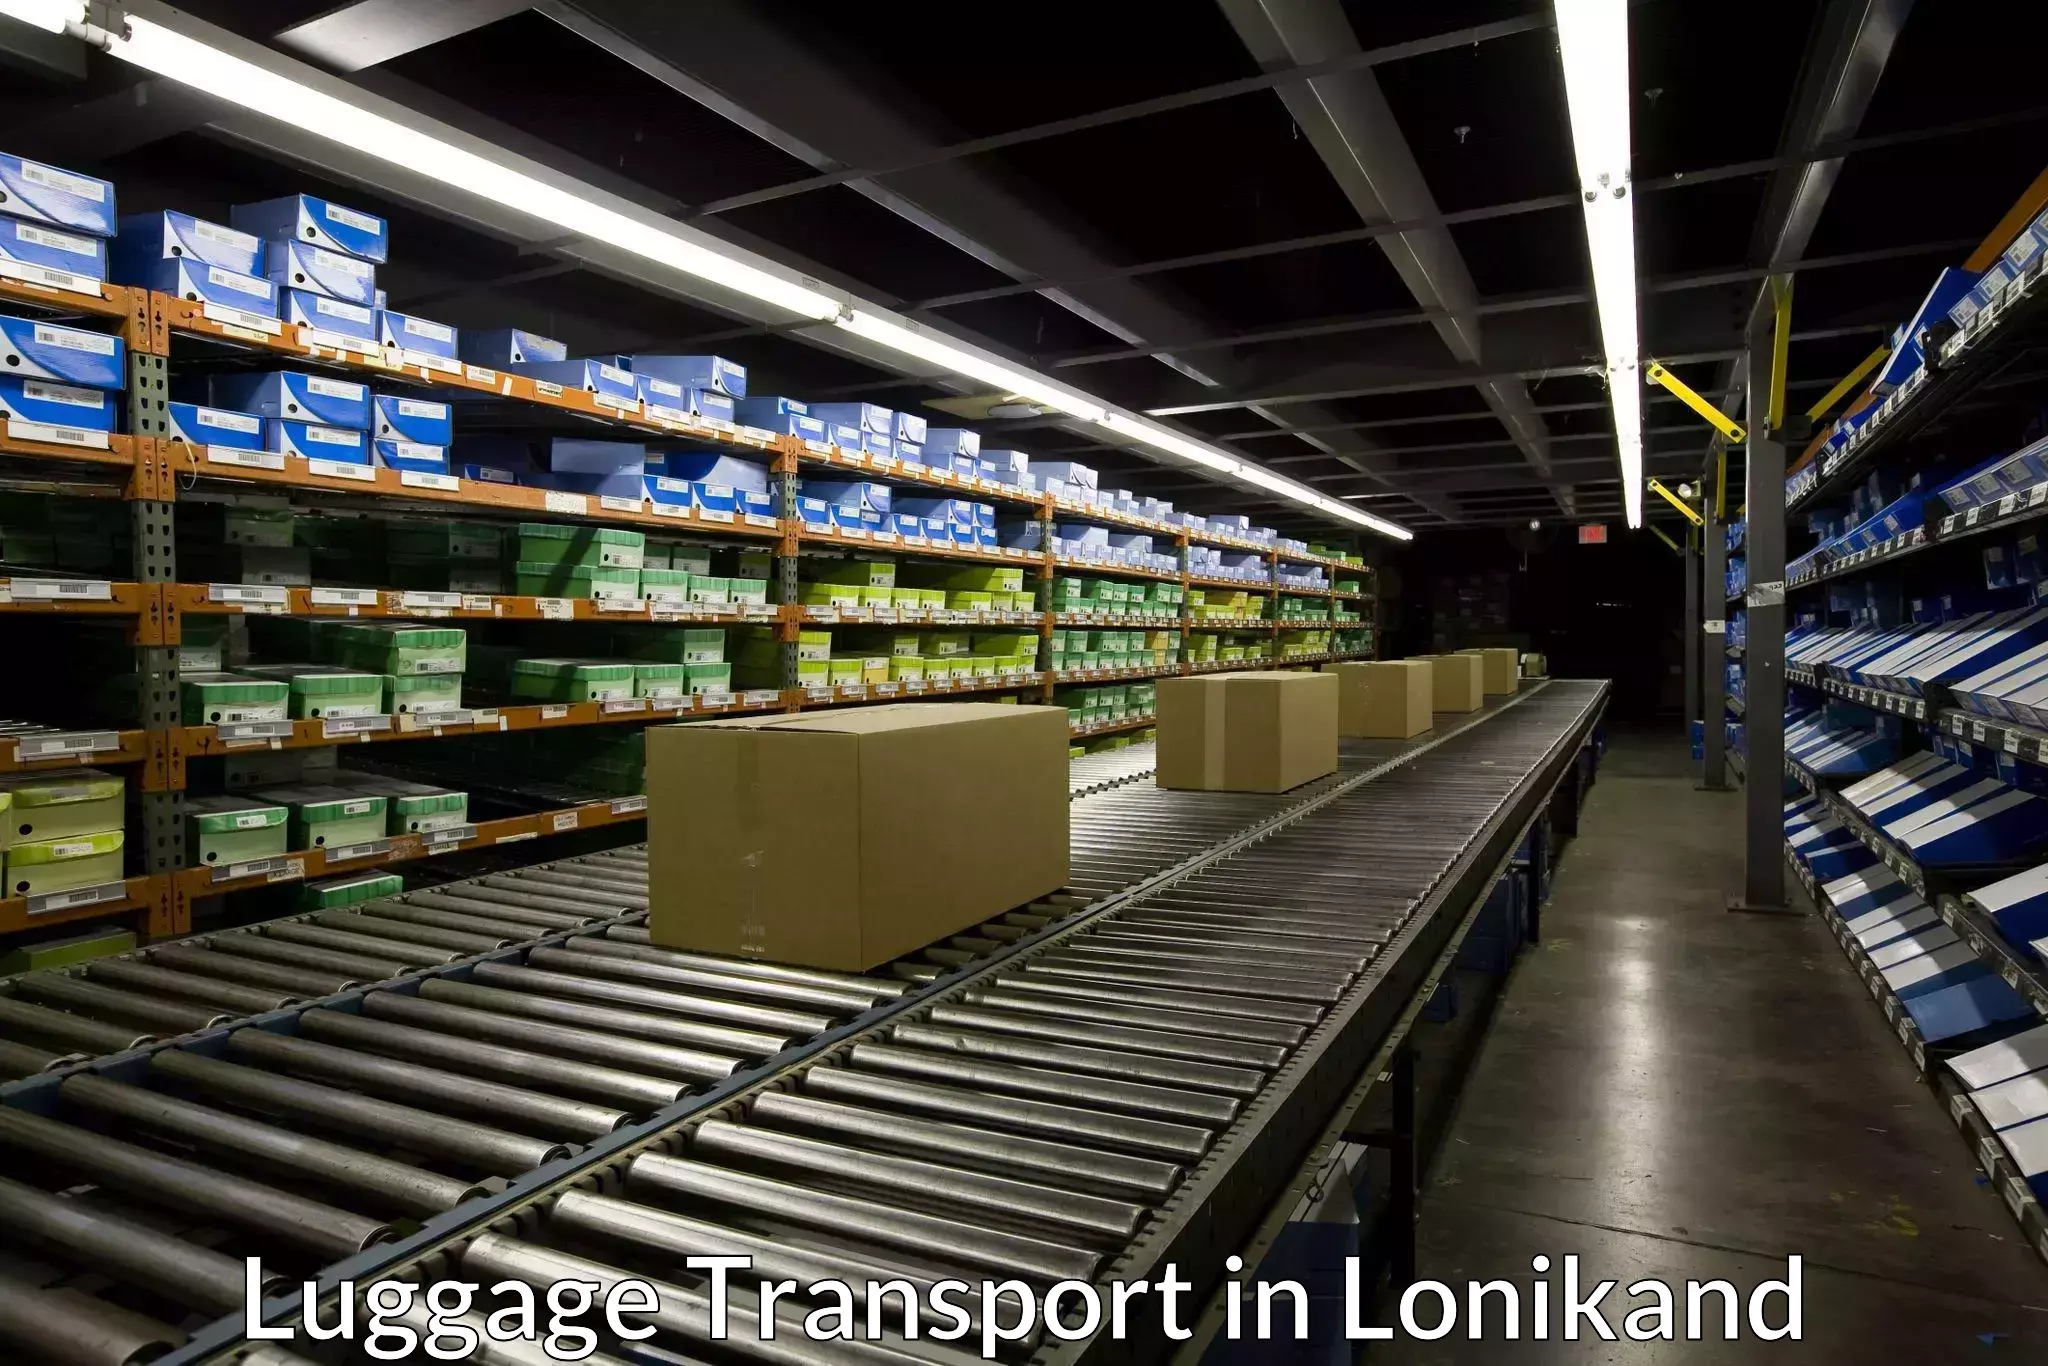 Baggage transport network in Lonikand